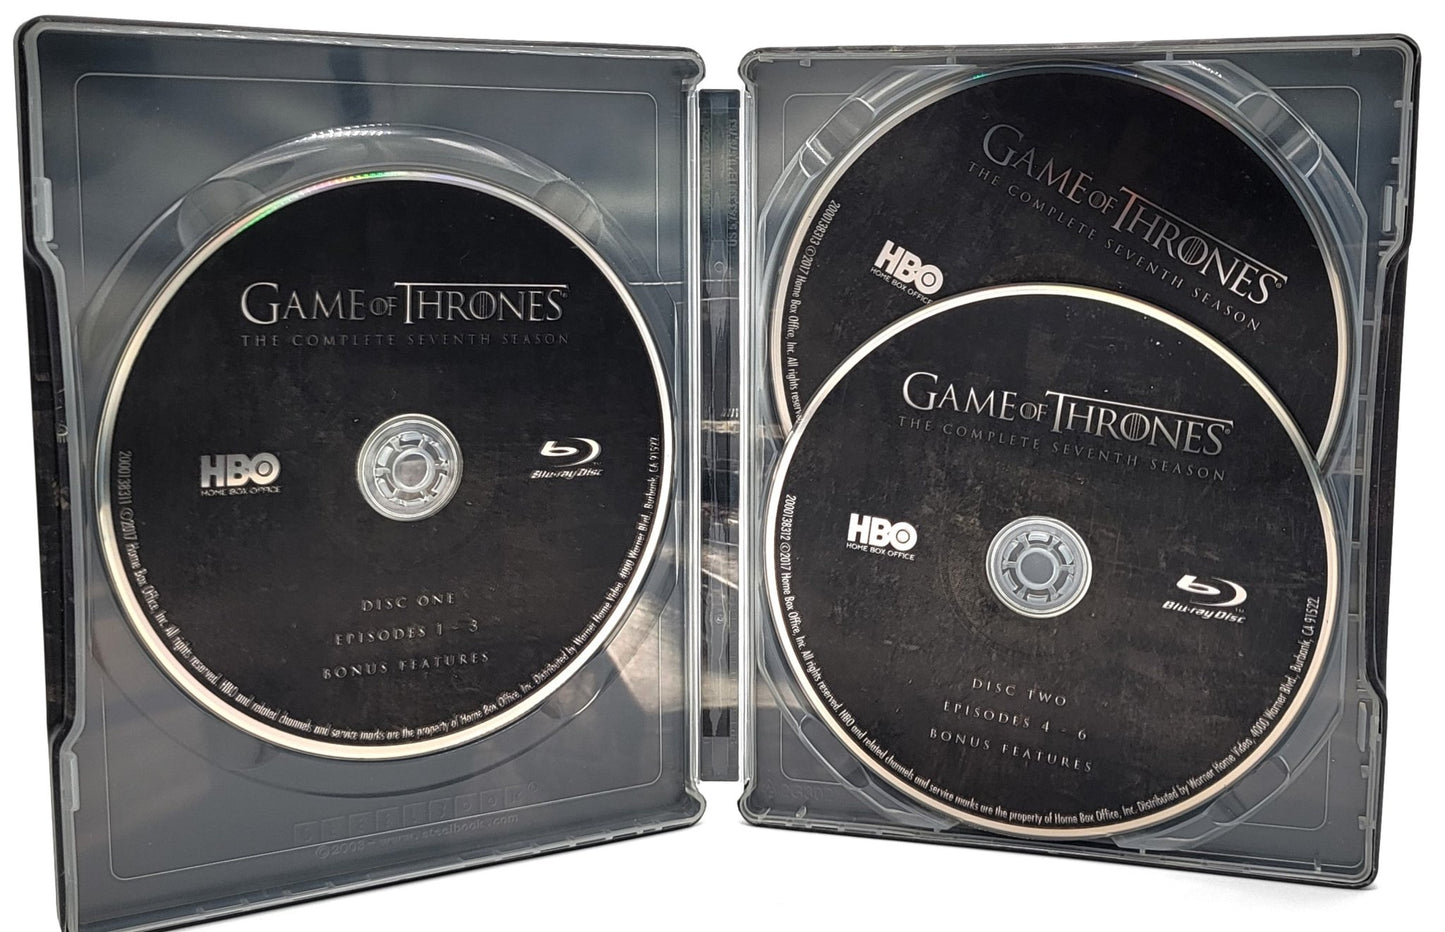 HBO Home Entertainment - Steel Book Game of Thrones - Dragonstone - The Complete Seventh Season | Blu Ray 3 Disc Set - Limited Edition Collectors Tin - Blu-ray - Steady Bunny Shop